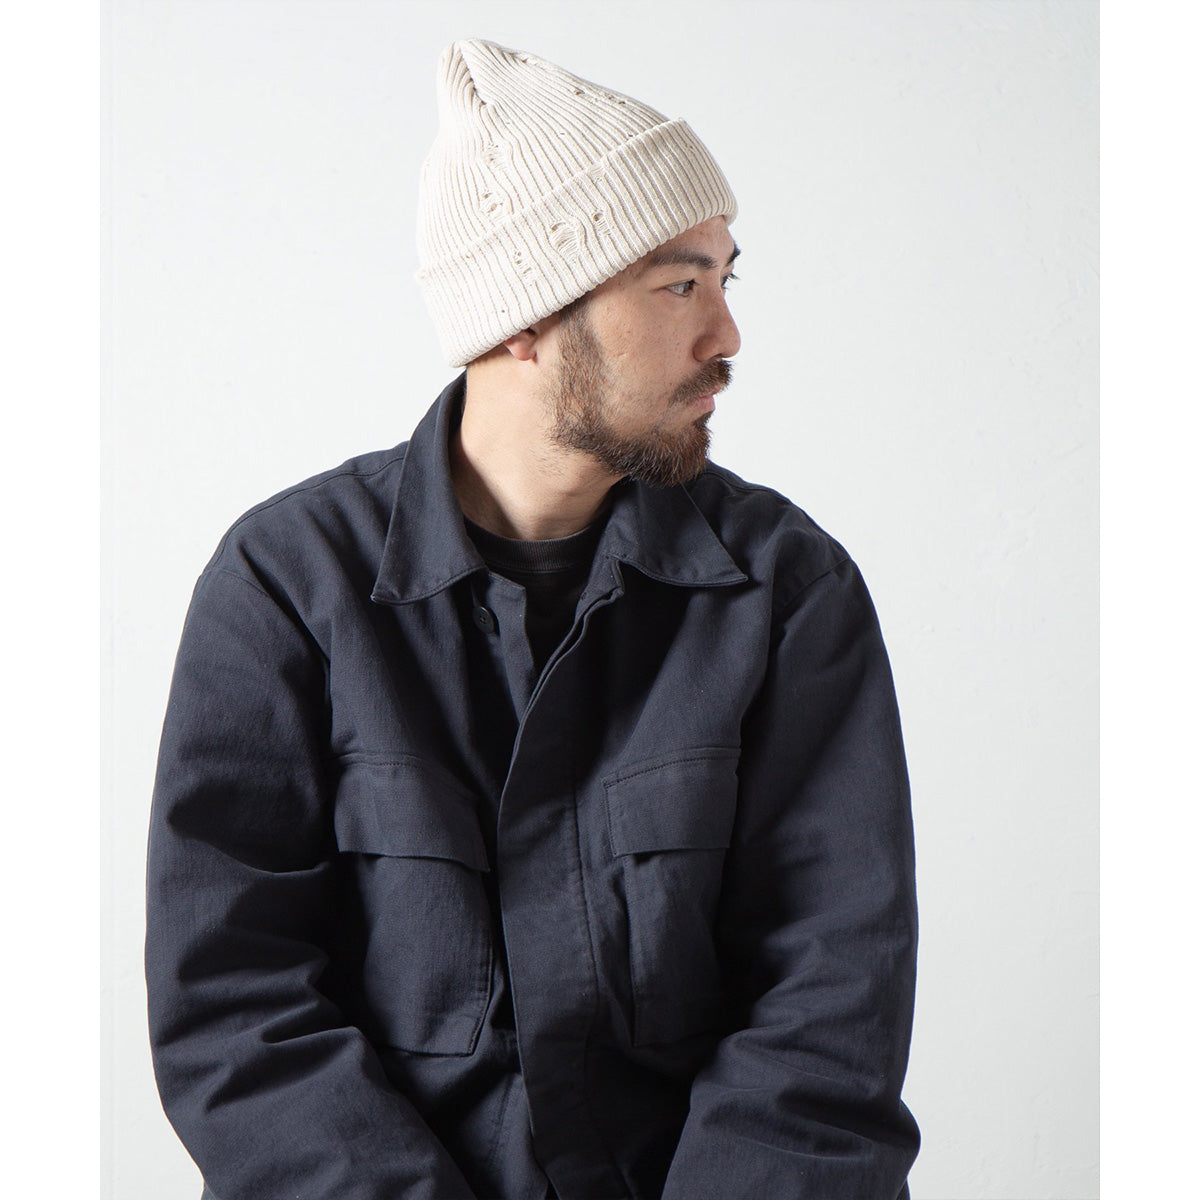 Racal Ripped Cotton Knit Watch Cap, Ivory